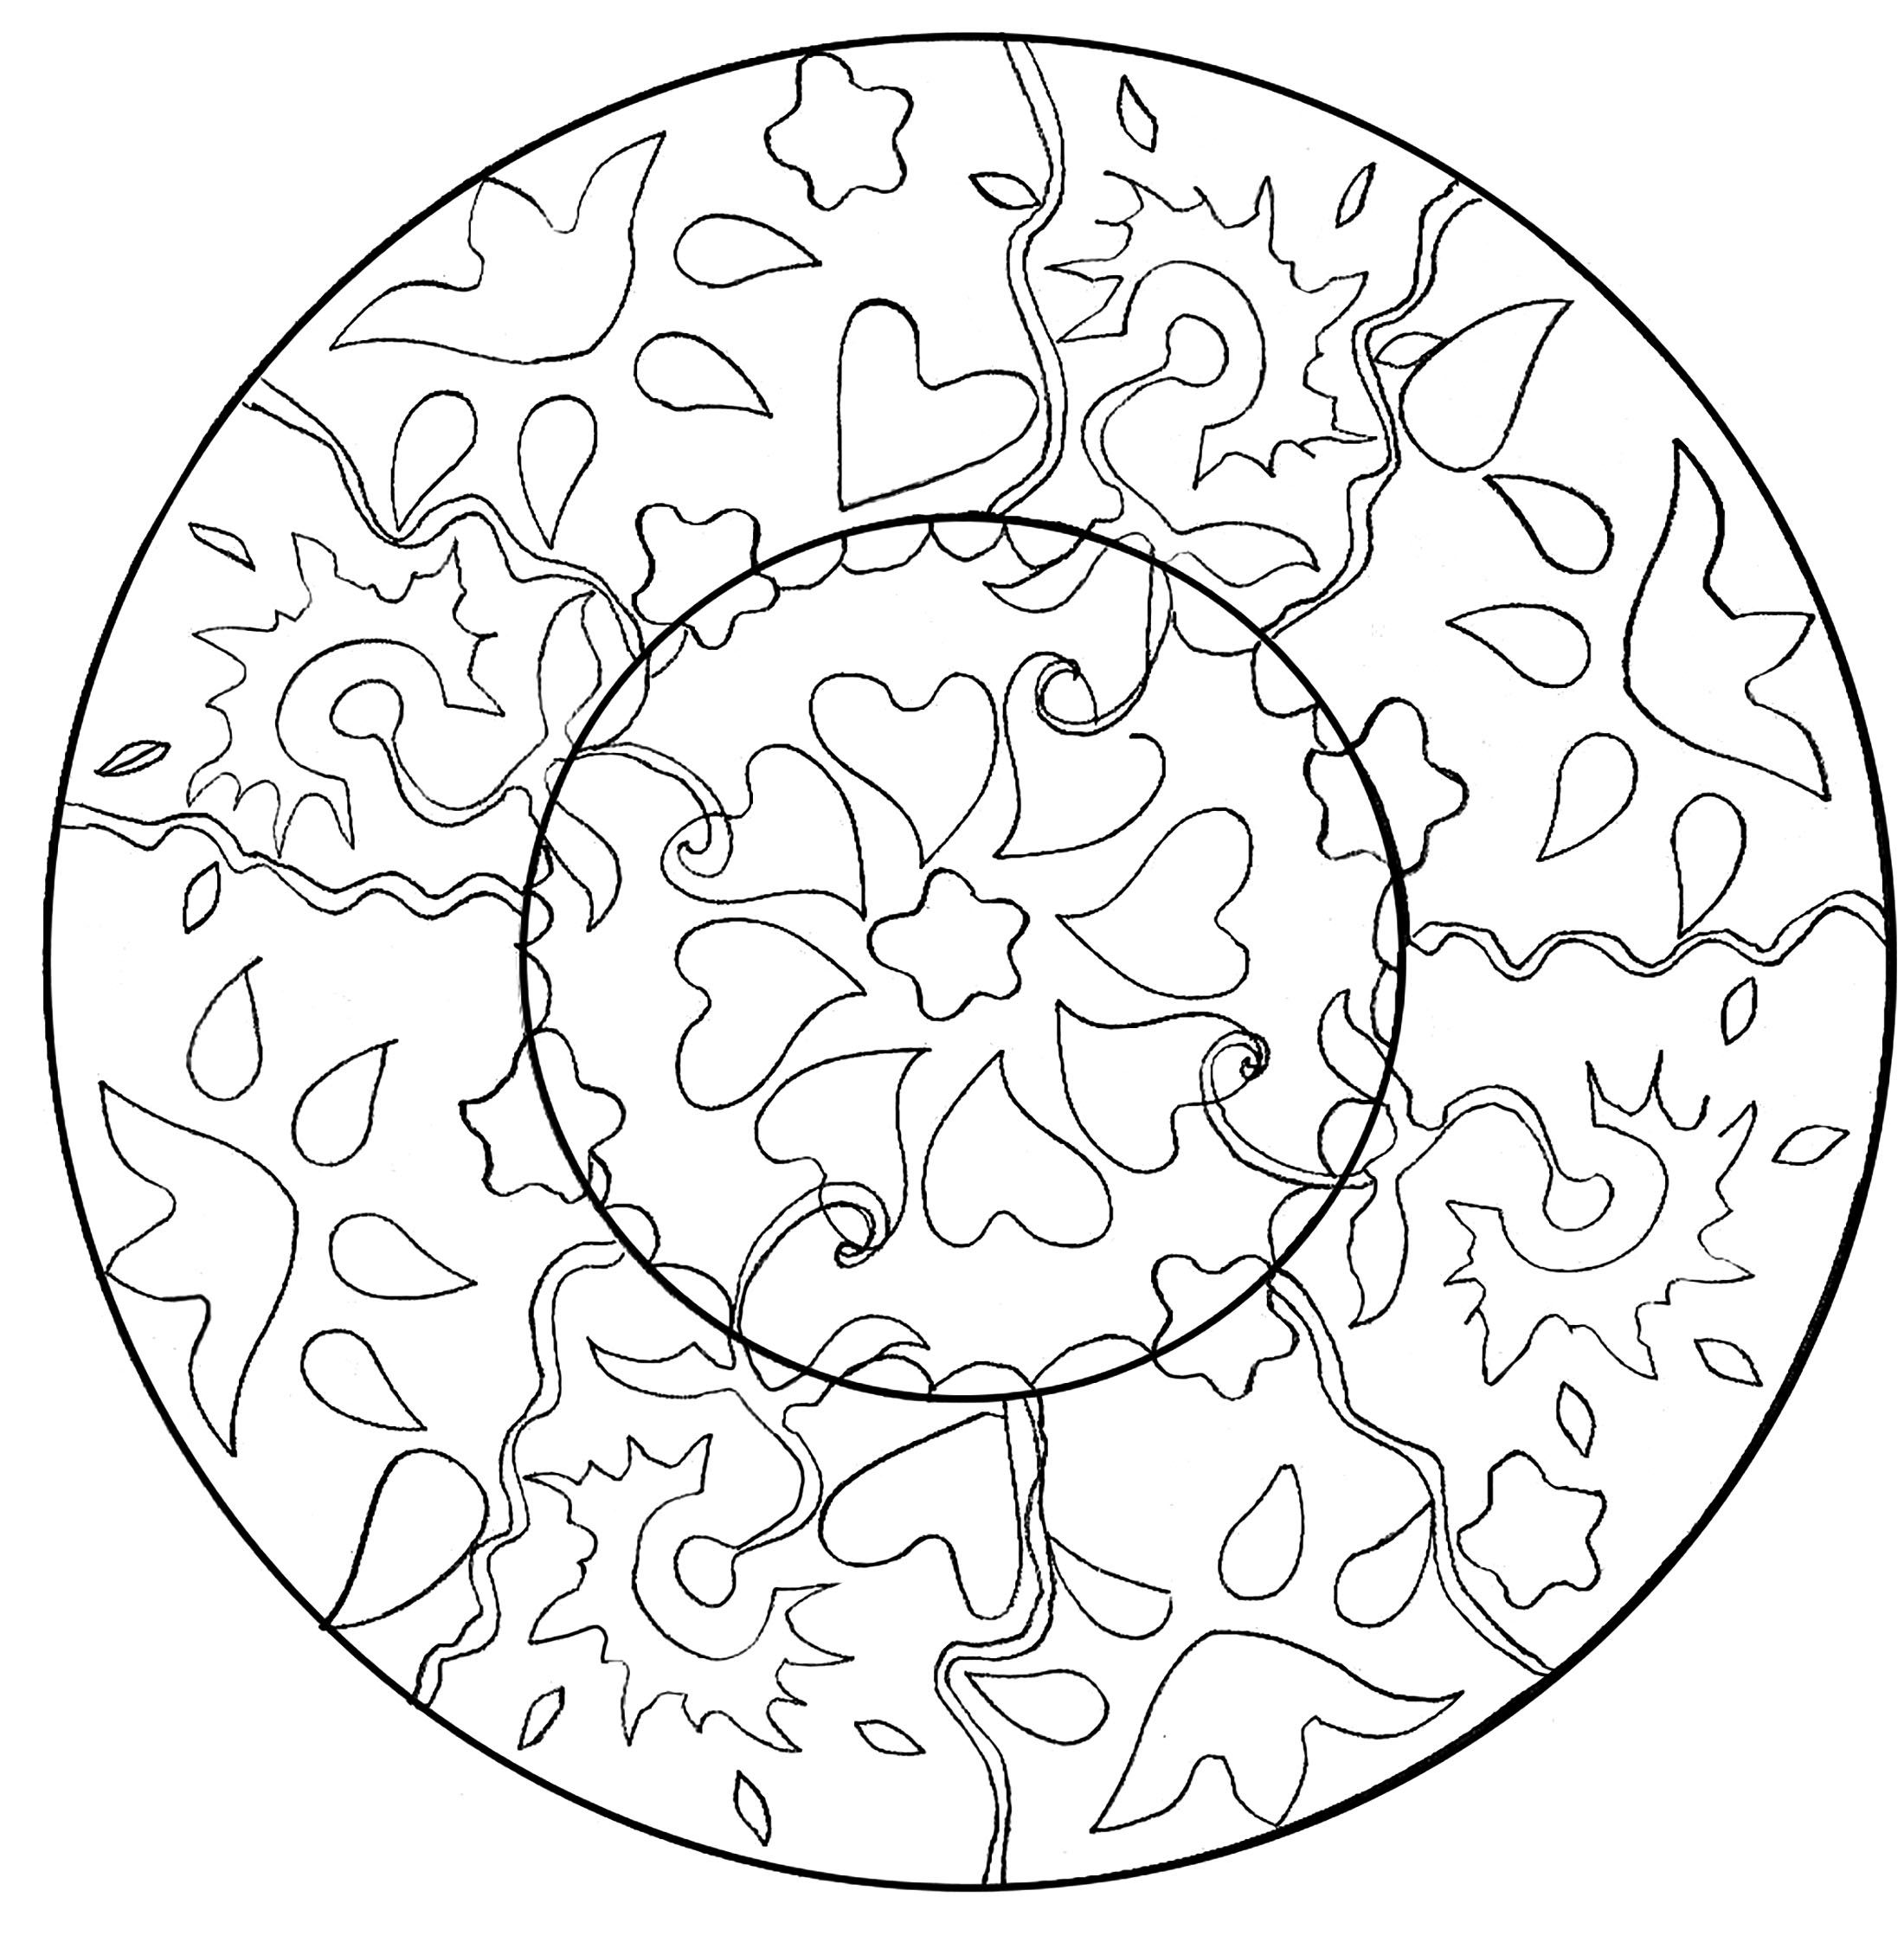 Just few details in this easy Mandala, which will suit kids and adults looking for not too complicated coloring pages. Completing a coloring sheet gives your kids a sense of accomplishment, which builds their self esteem and confidence.